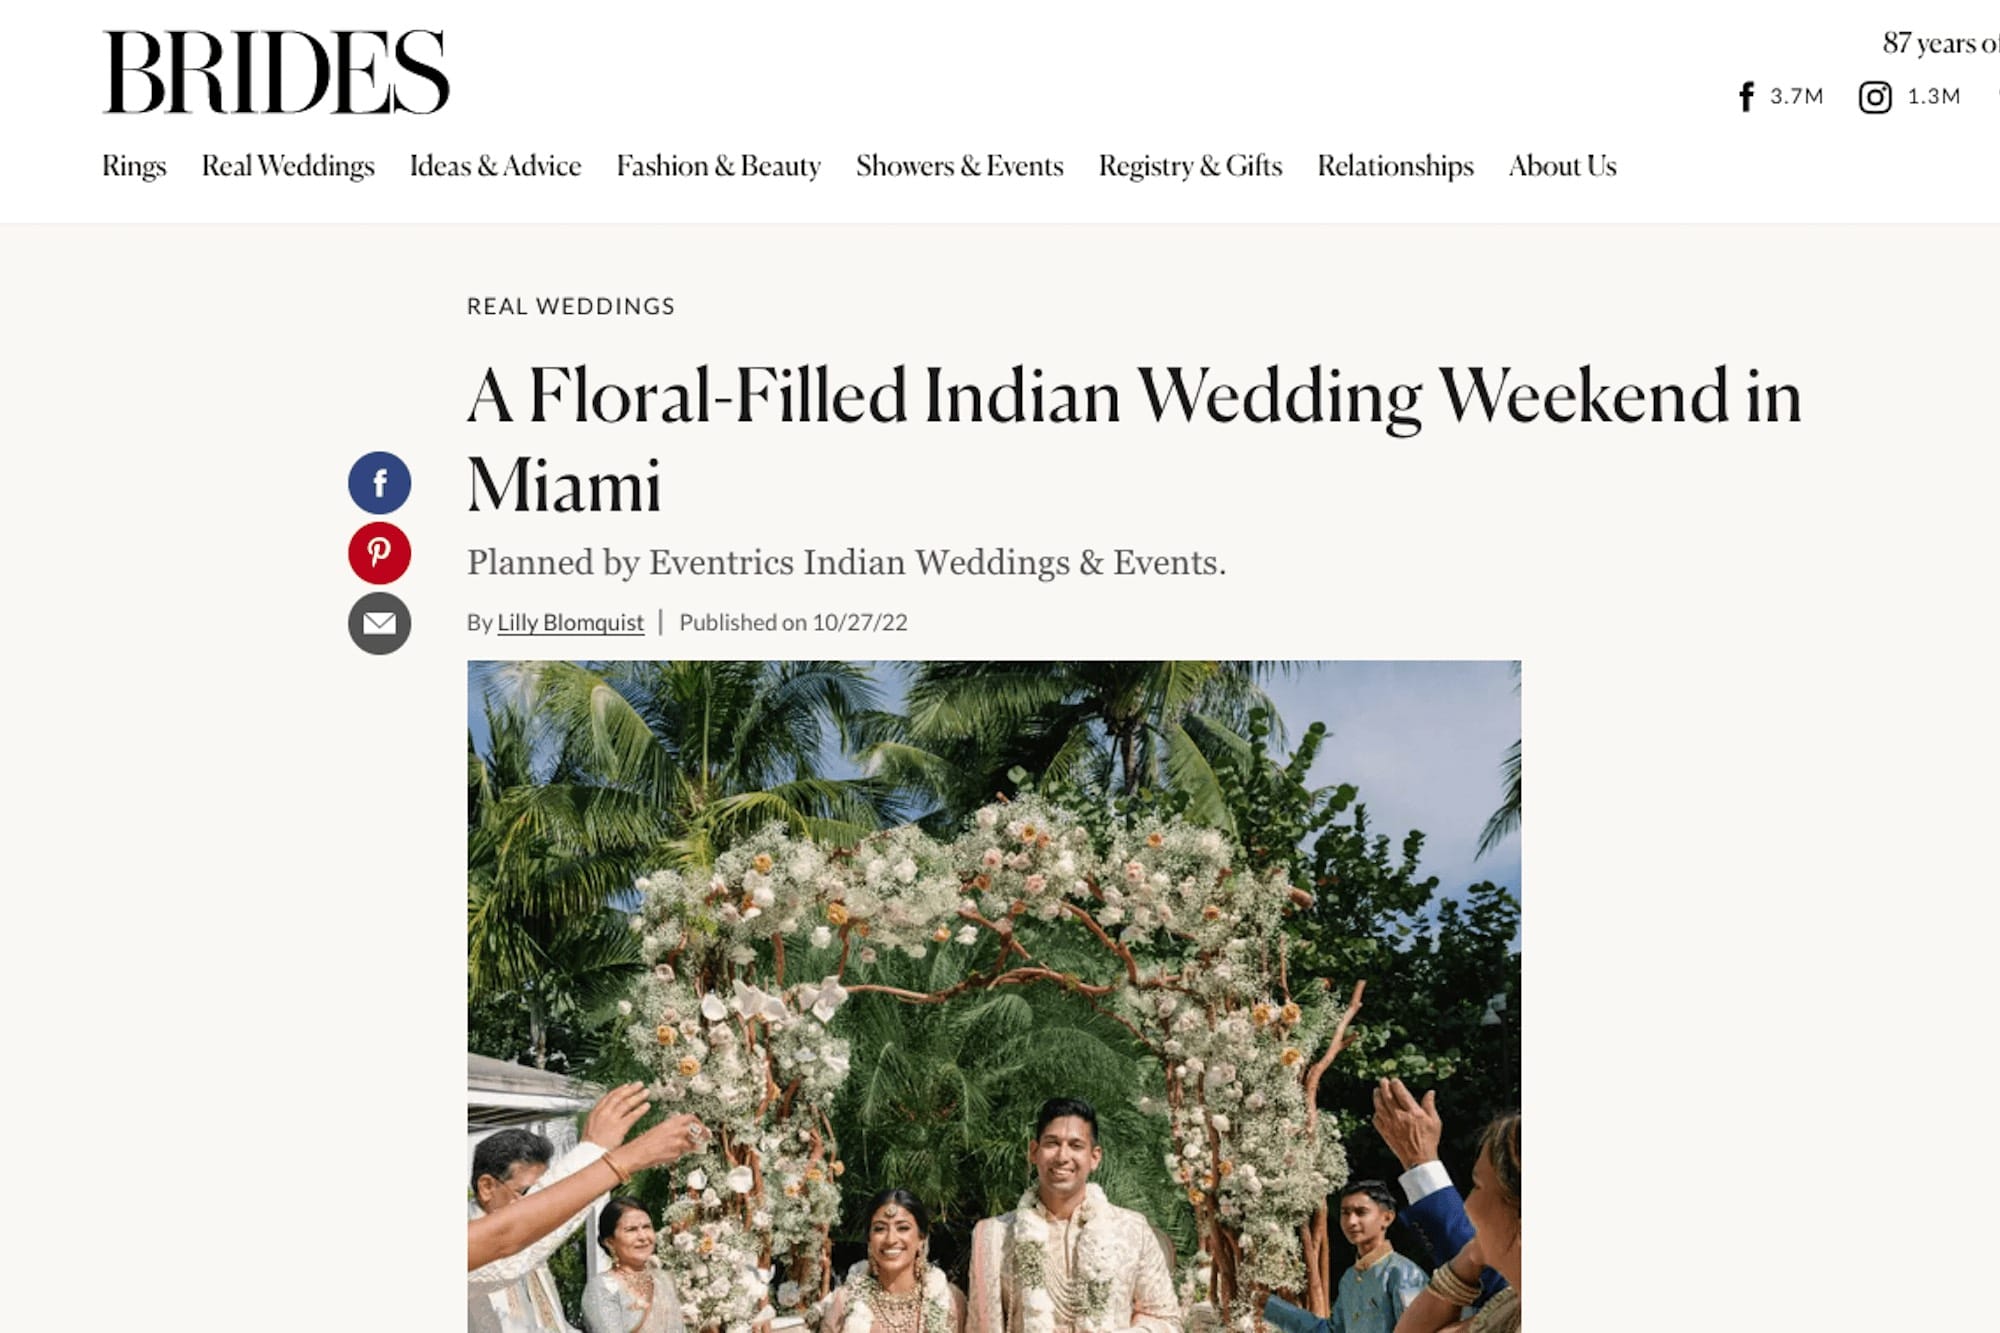 A Floral-Filled Indian Wedding Weekend in Miami